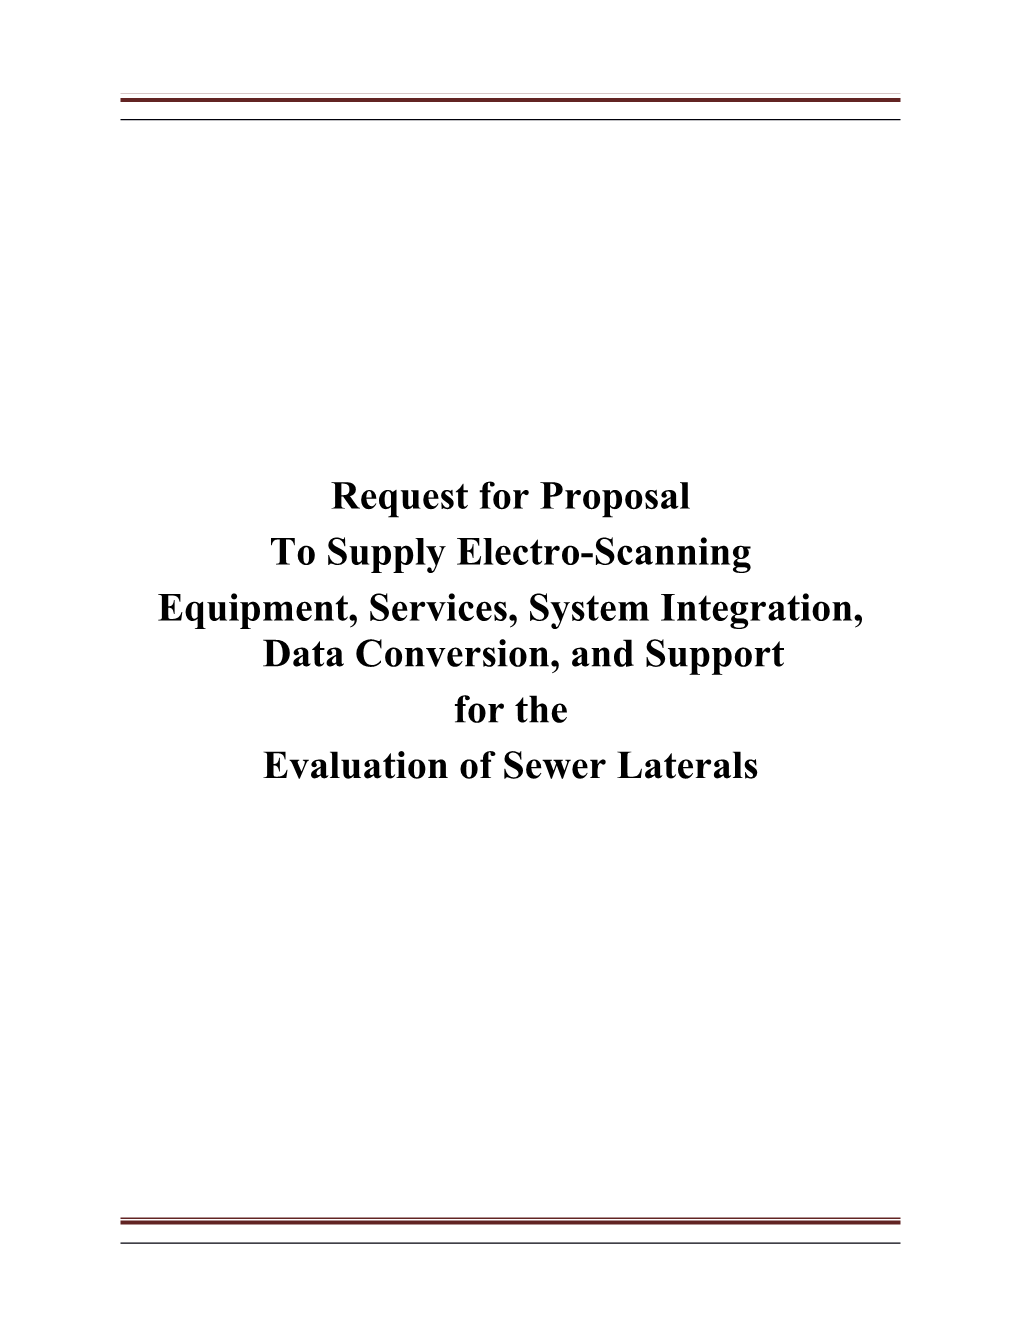 RFP for Electro Scanning Equipment, Services, Systems Integration, Data Conversion, And